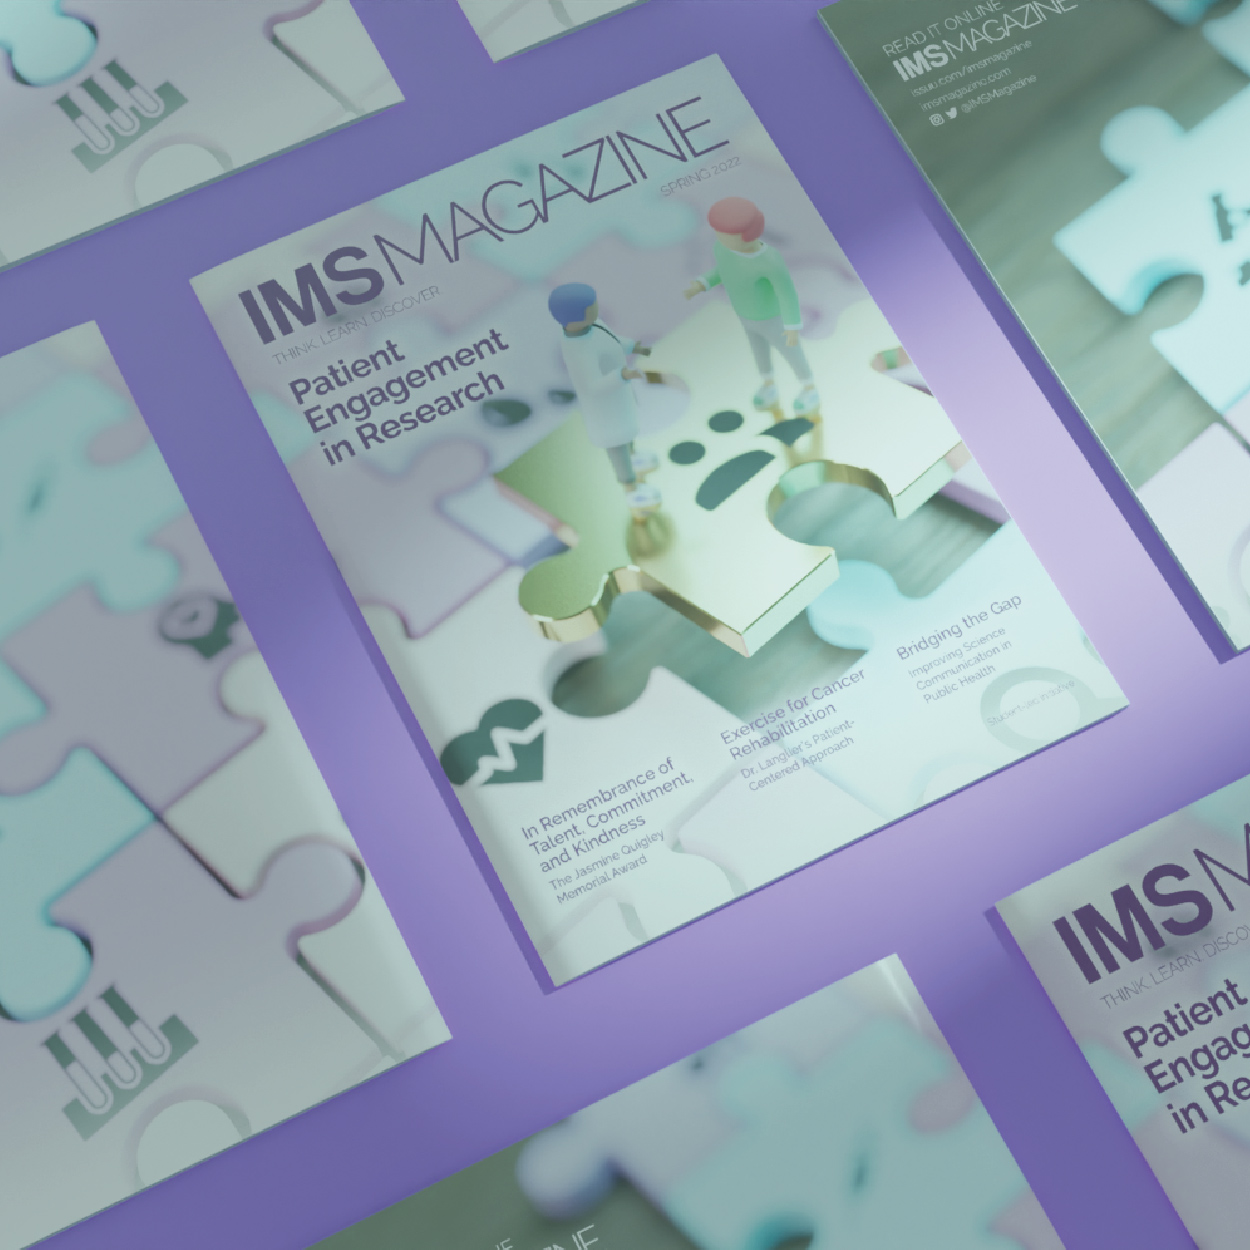 Thumbnail for IMS Spring Cover 2022 on Patient Engagement in Research